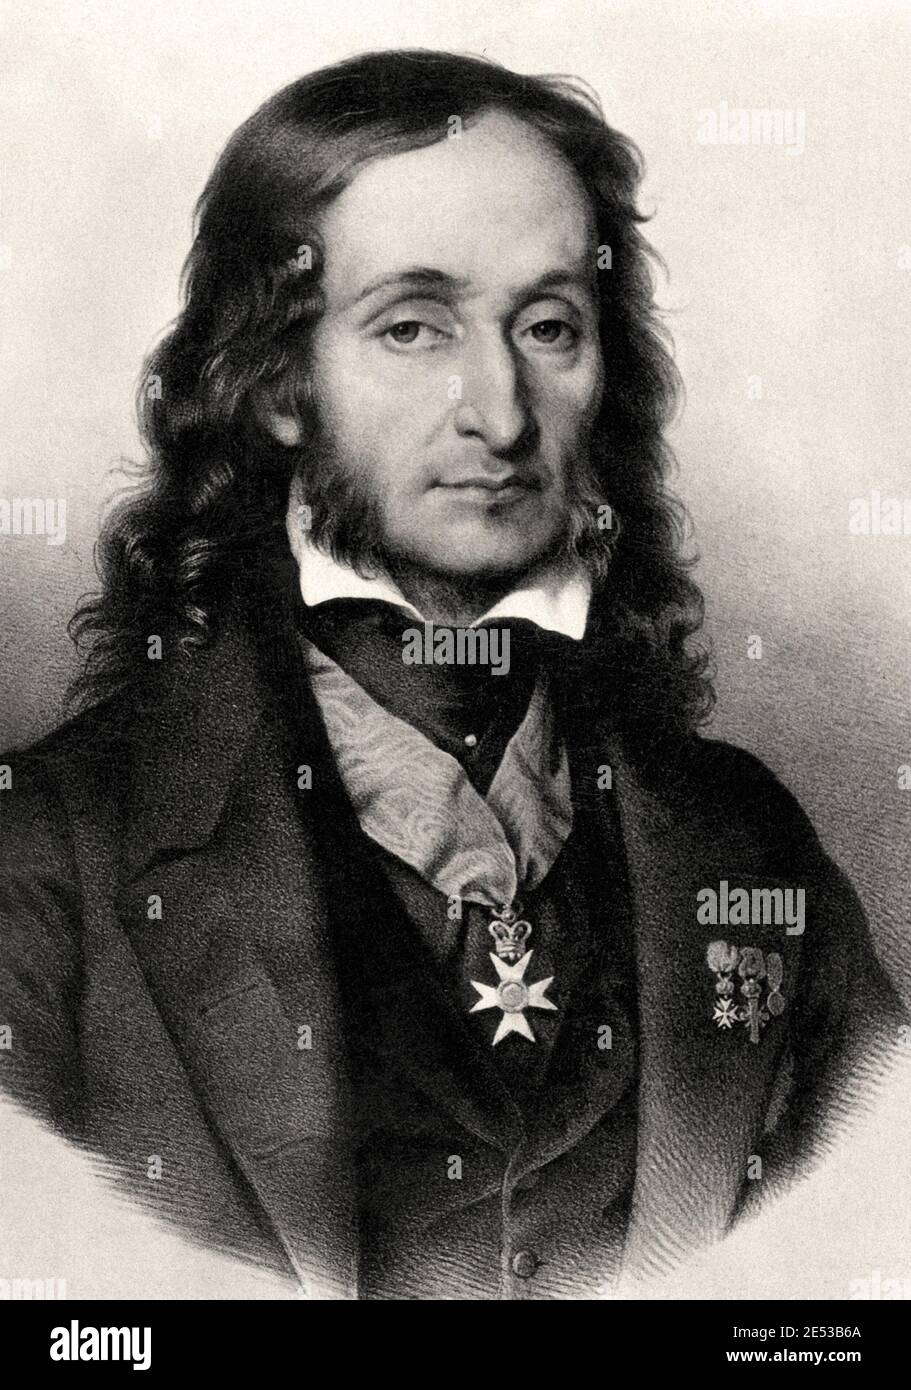 Niccolo Paganini (1782 – 1840) was an Italian violinist, violist, guitarist, and composer. He was the most celebrated violin virtuoso of his time, and Stock Photo